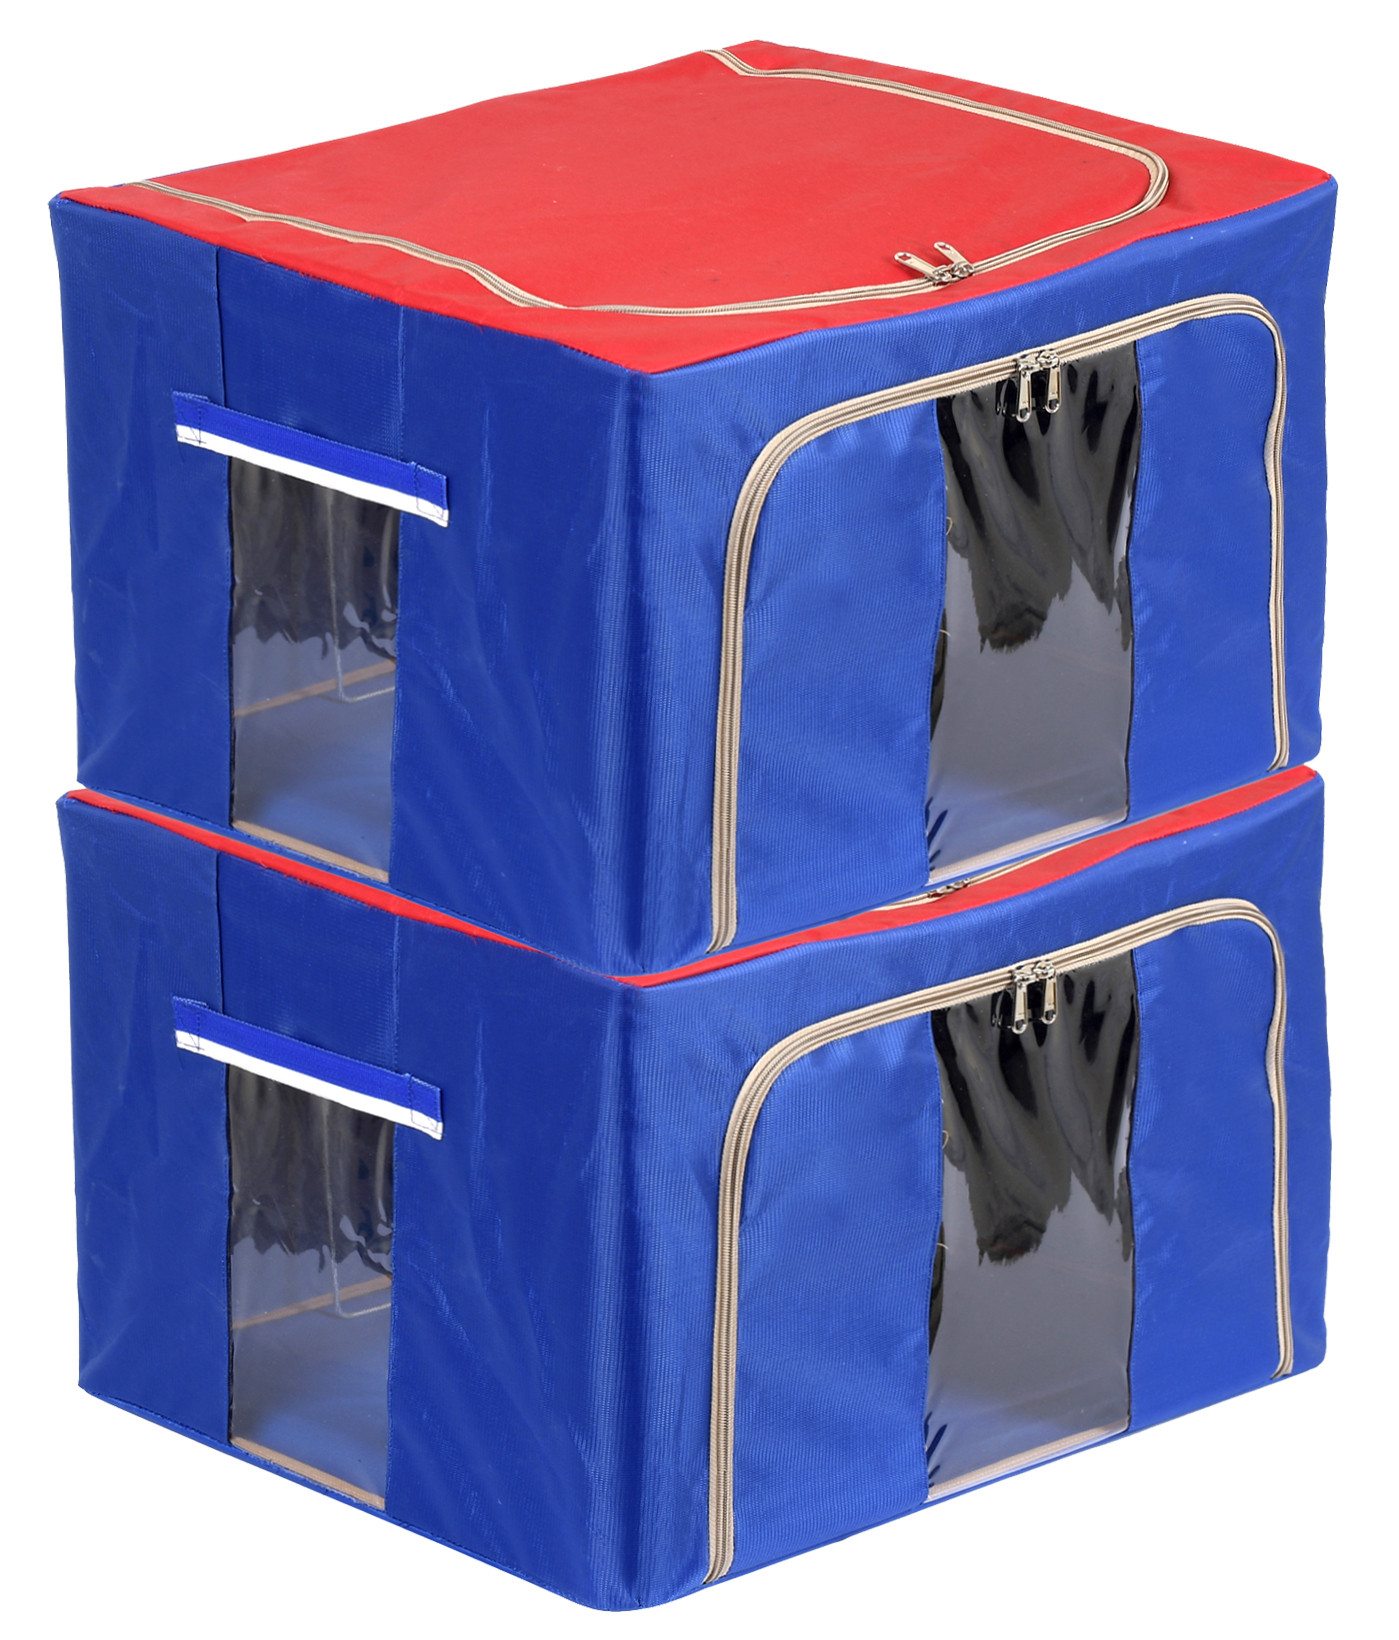 Kuber Industries Steel Frame Storage Box/Organizer For Clothing, Blankets, Bedding With Clear Window, 44Ltr. (Red & Blue)-44KM0297